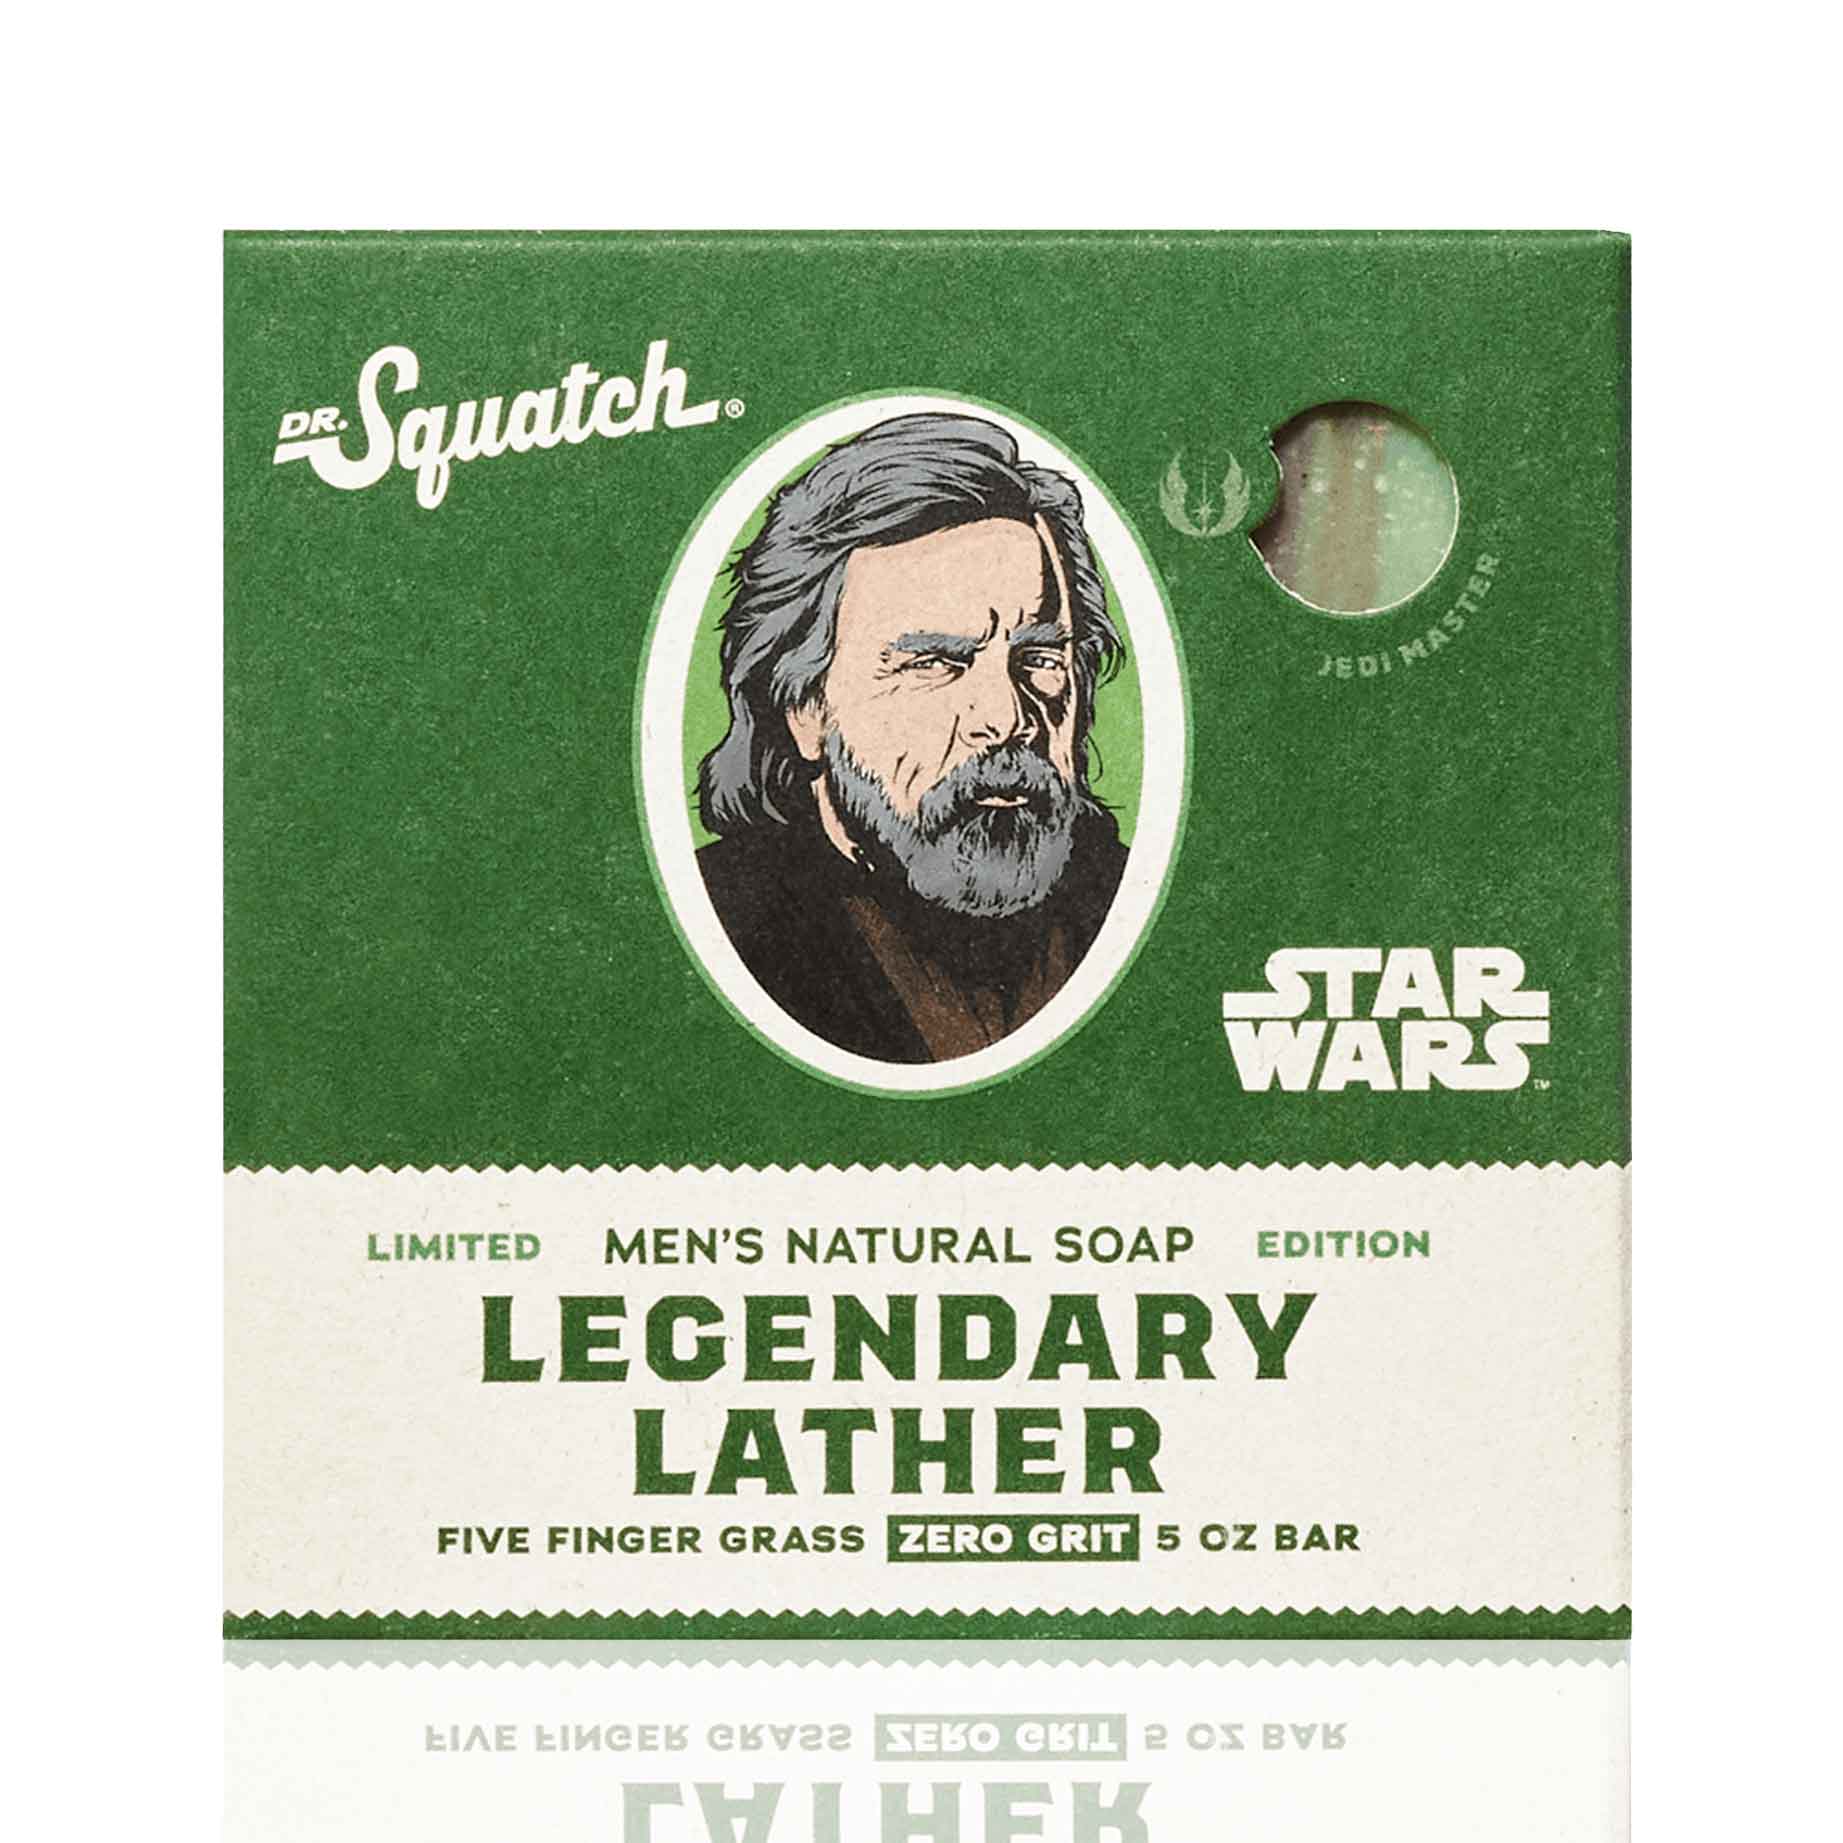 Dr. Squatch Star Wars Soap Collection has soap inspired by